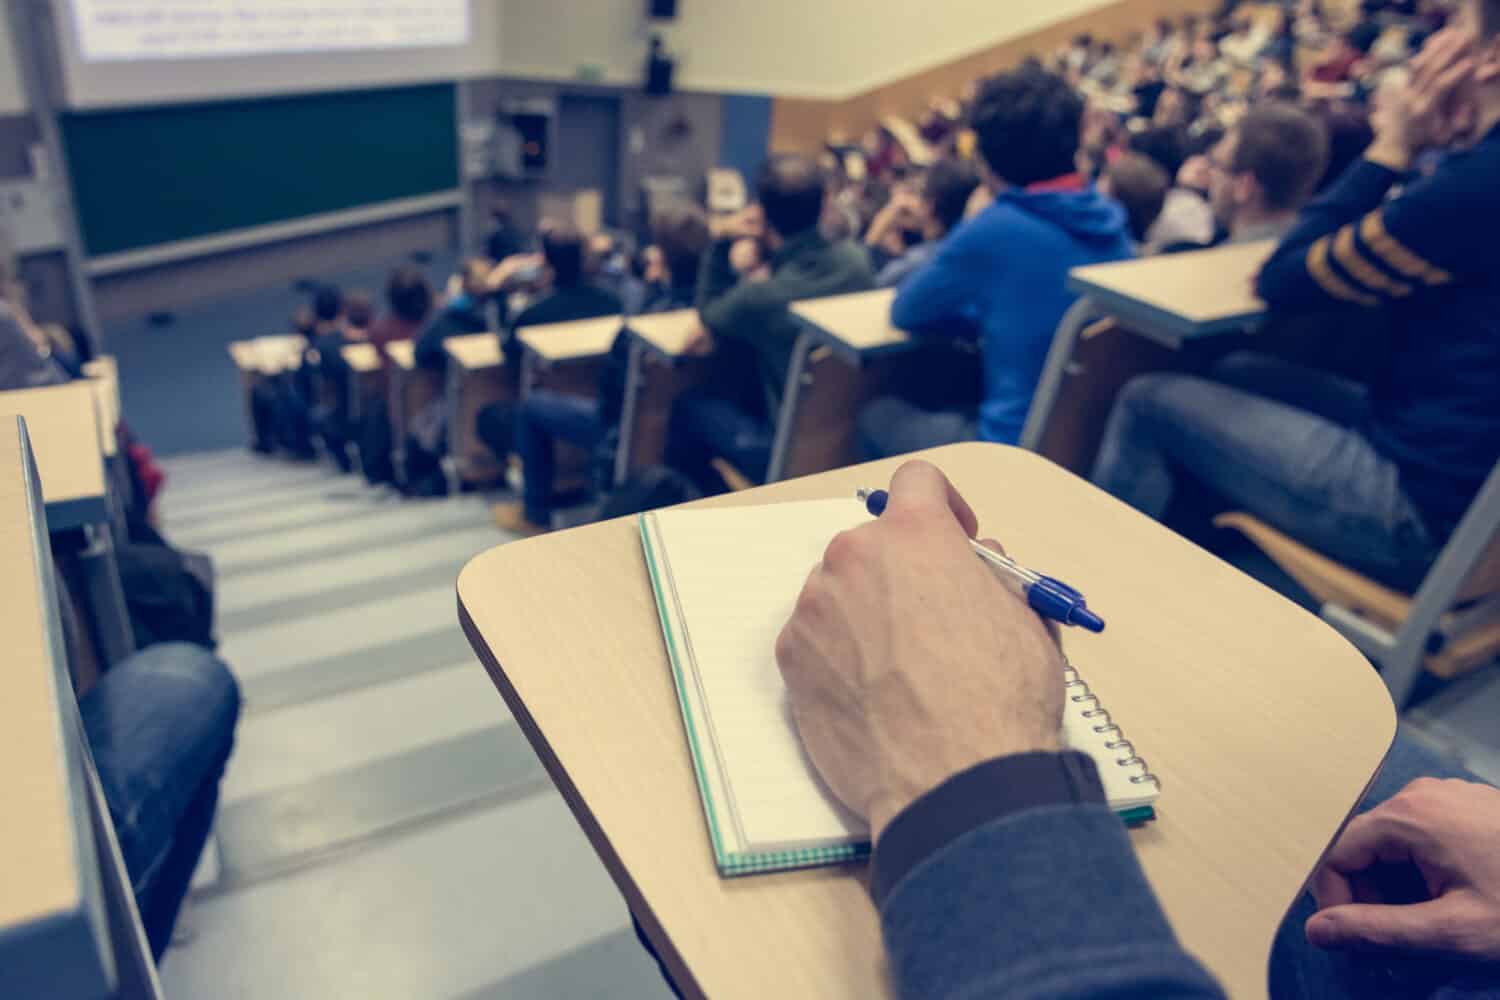 A university lecture hall with students taking notes.